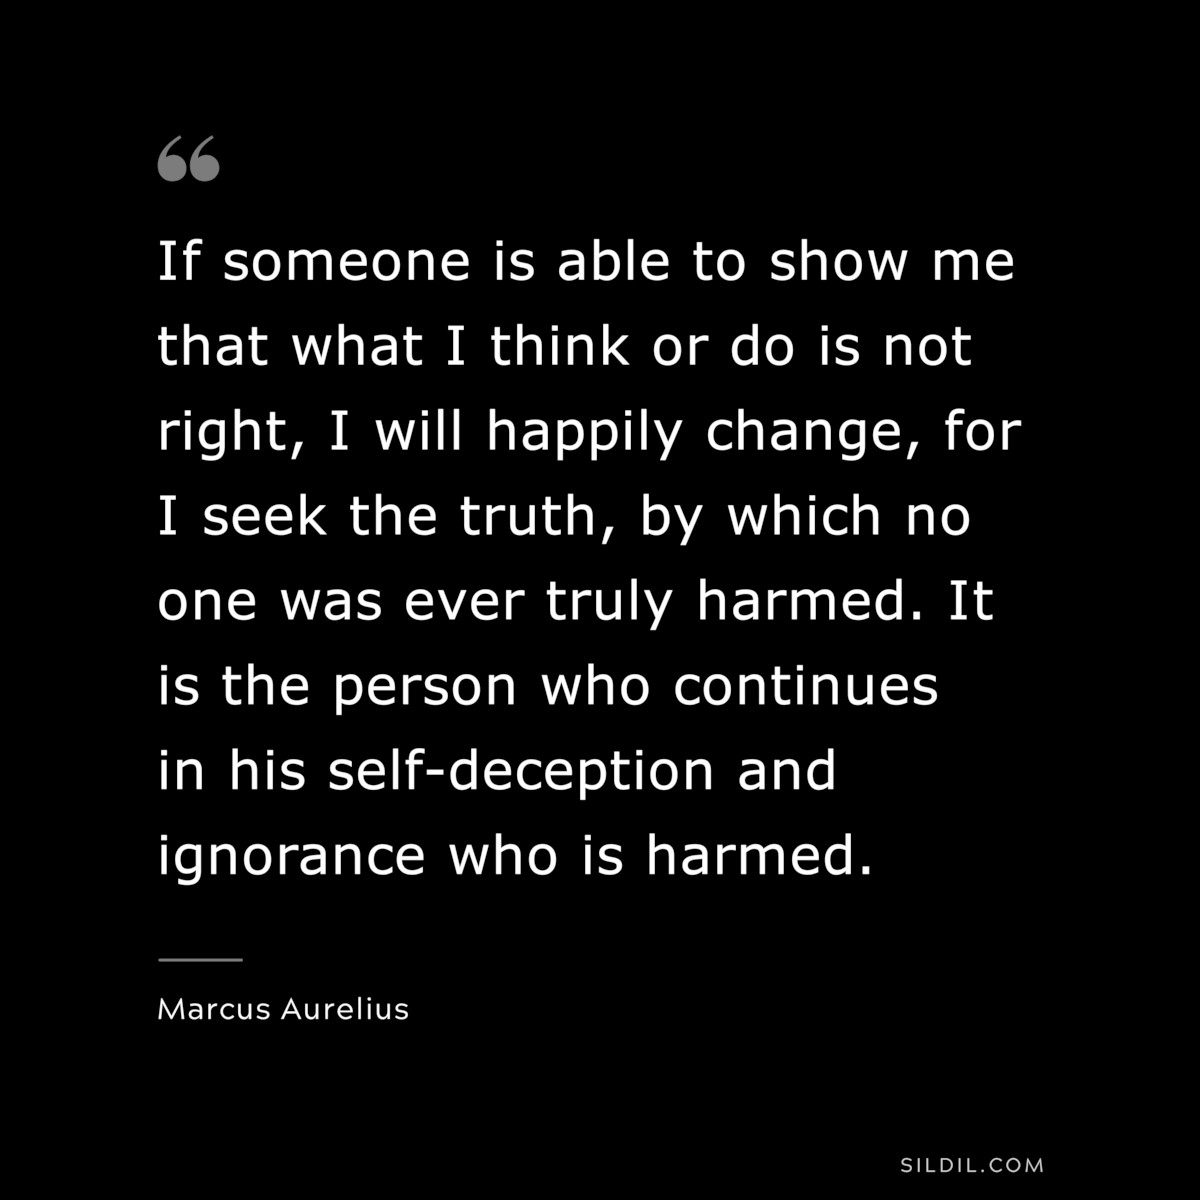 If someone is able to show me that what I think or do is not right, I will happily change, for I seek the truth, by which no one was ever truly harmed. It is the person who continues in his self-deception and ignorance who is harmed. ― Marcus Aurelius